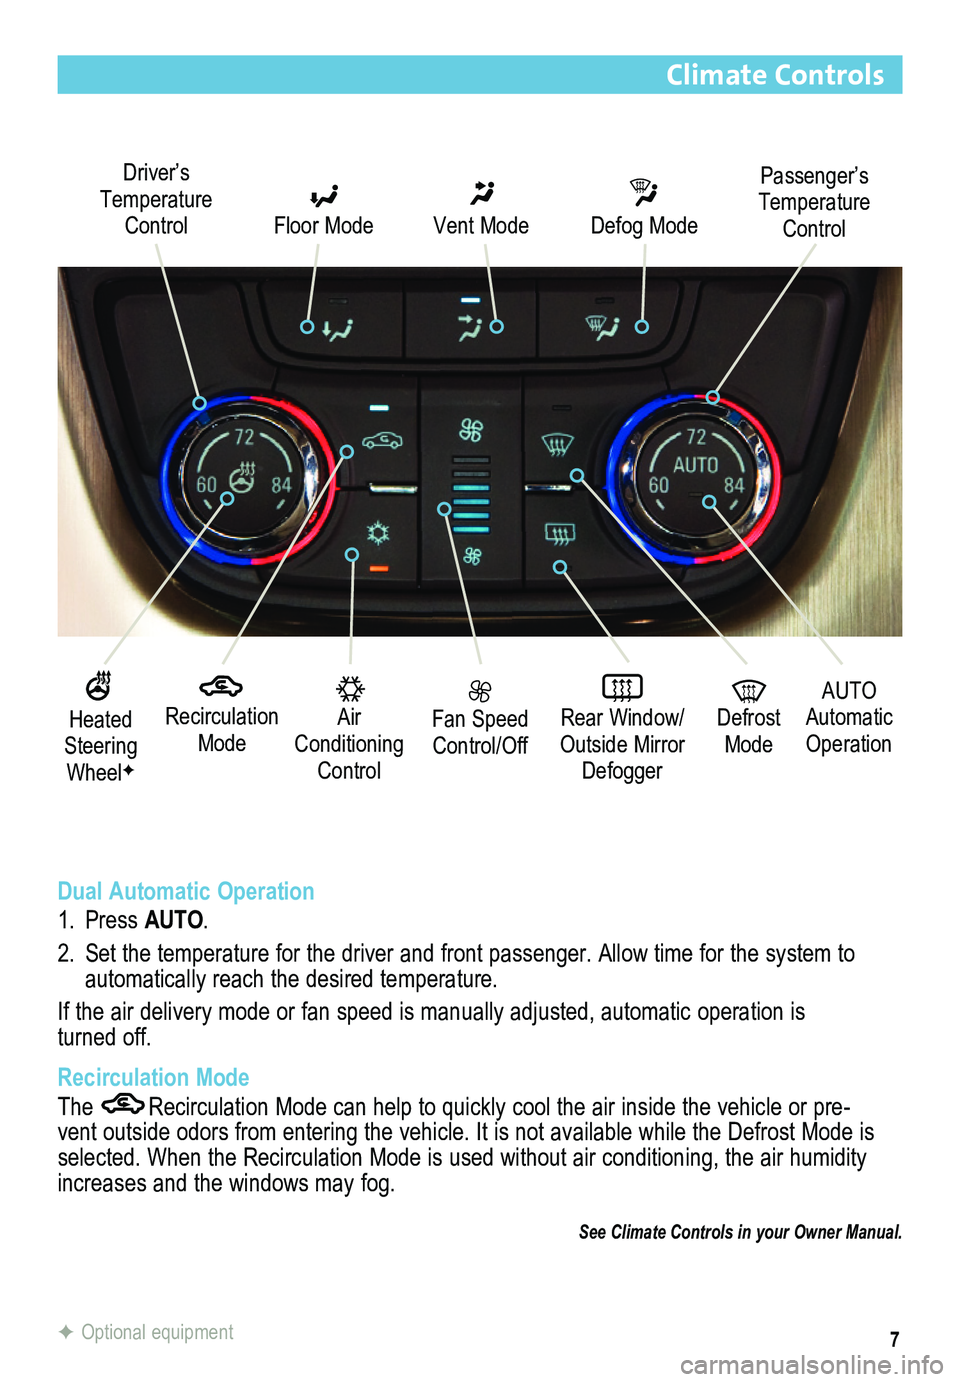 BUICK VERANO 2014  Get To Know Guide 7
Climate Controls
 
Recirculation Mode
Driver’s Temperature Control  Floor Mode
 Vent Mode
 Defog Mode
 Fan Speed Control/Off
 Rear Window/ Outside Mirror Defogger
  Air Conditioning Control
AUTO 
